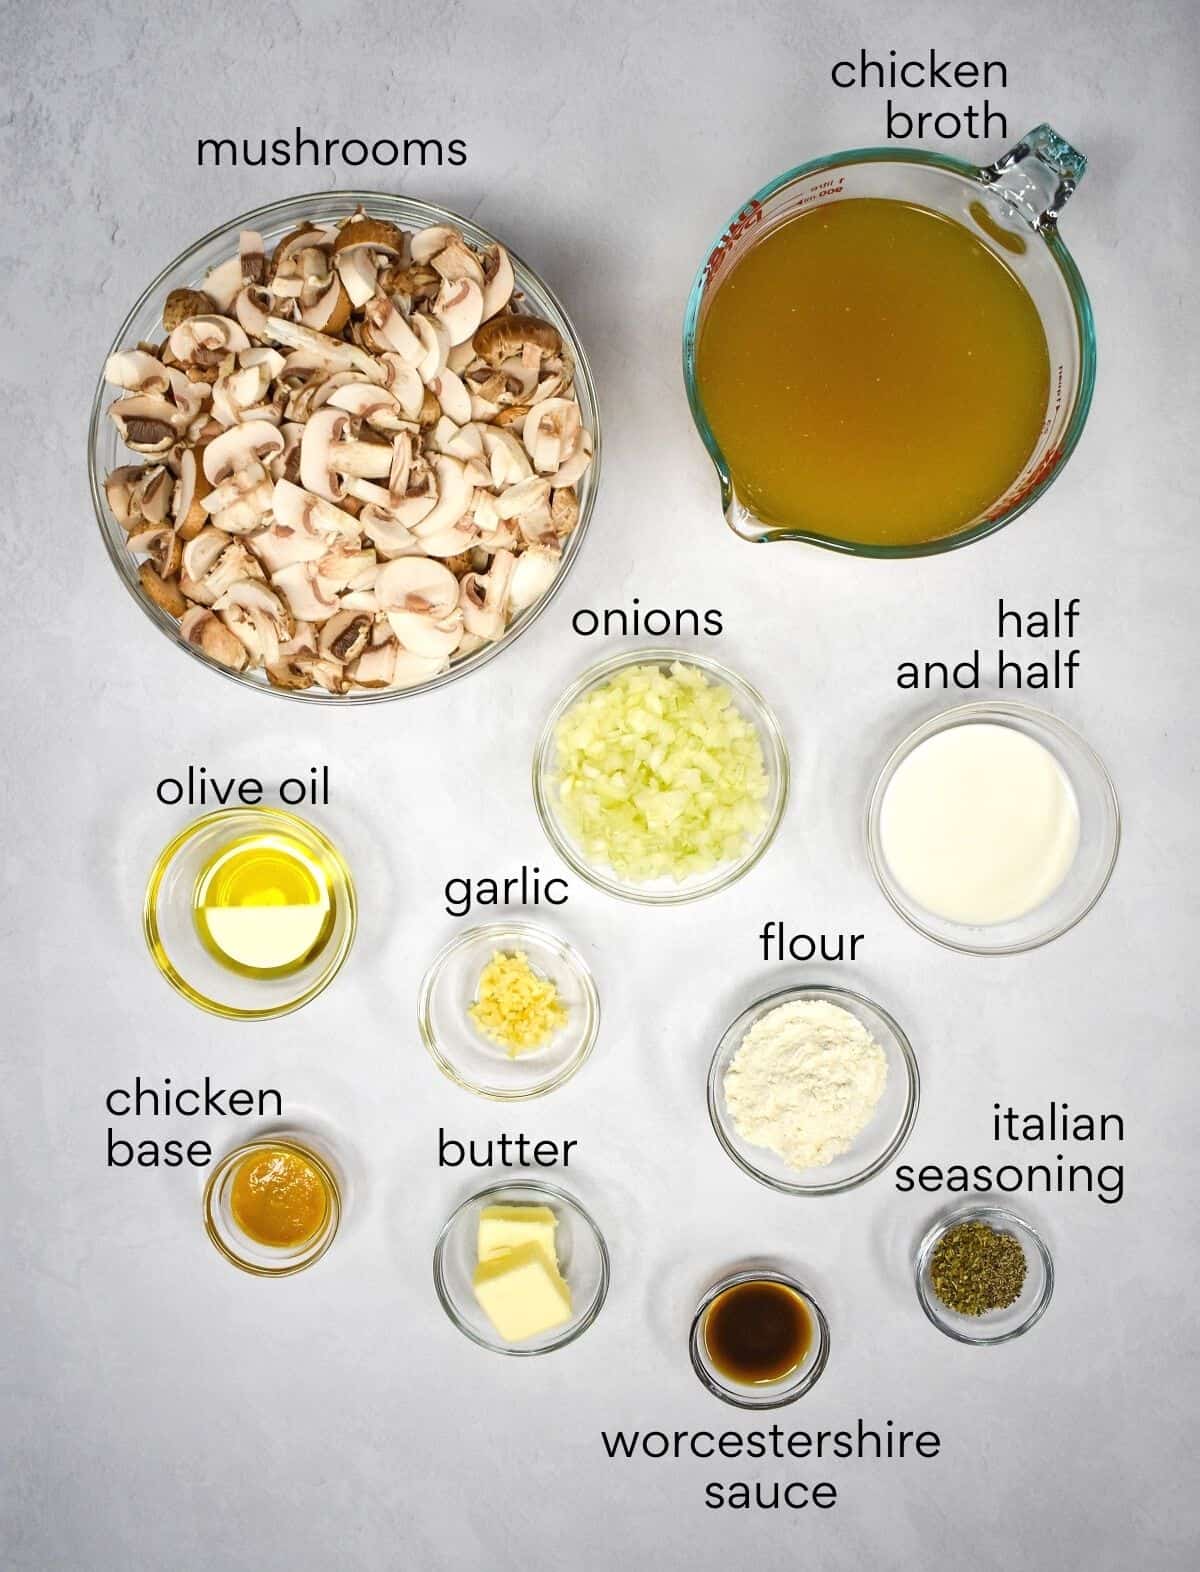 The ingredients for the mushroom soup prepped and arranged in glass bowls on a white table. Each ingredient is labeled with small black letters.